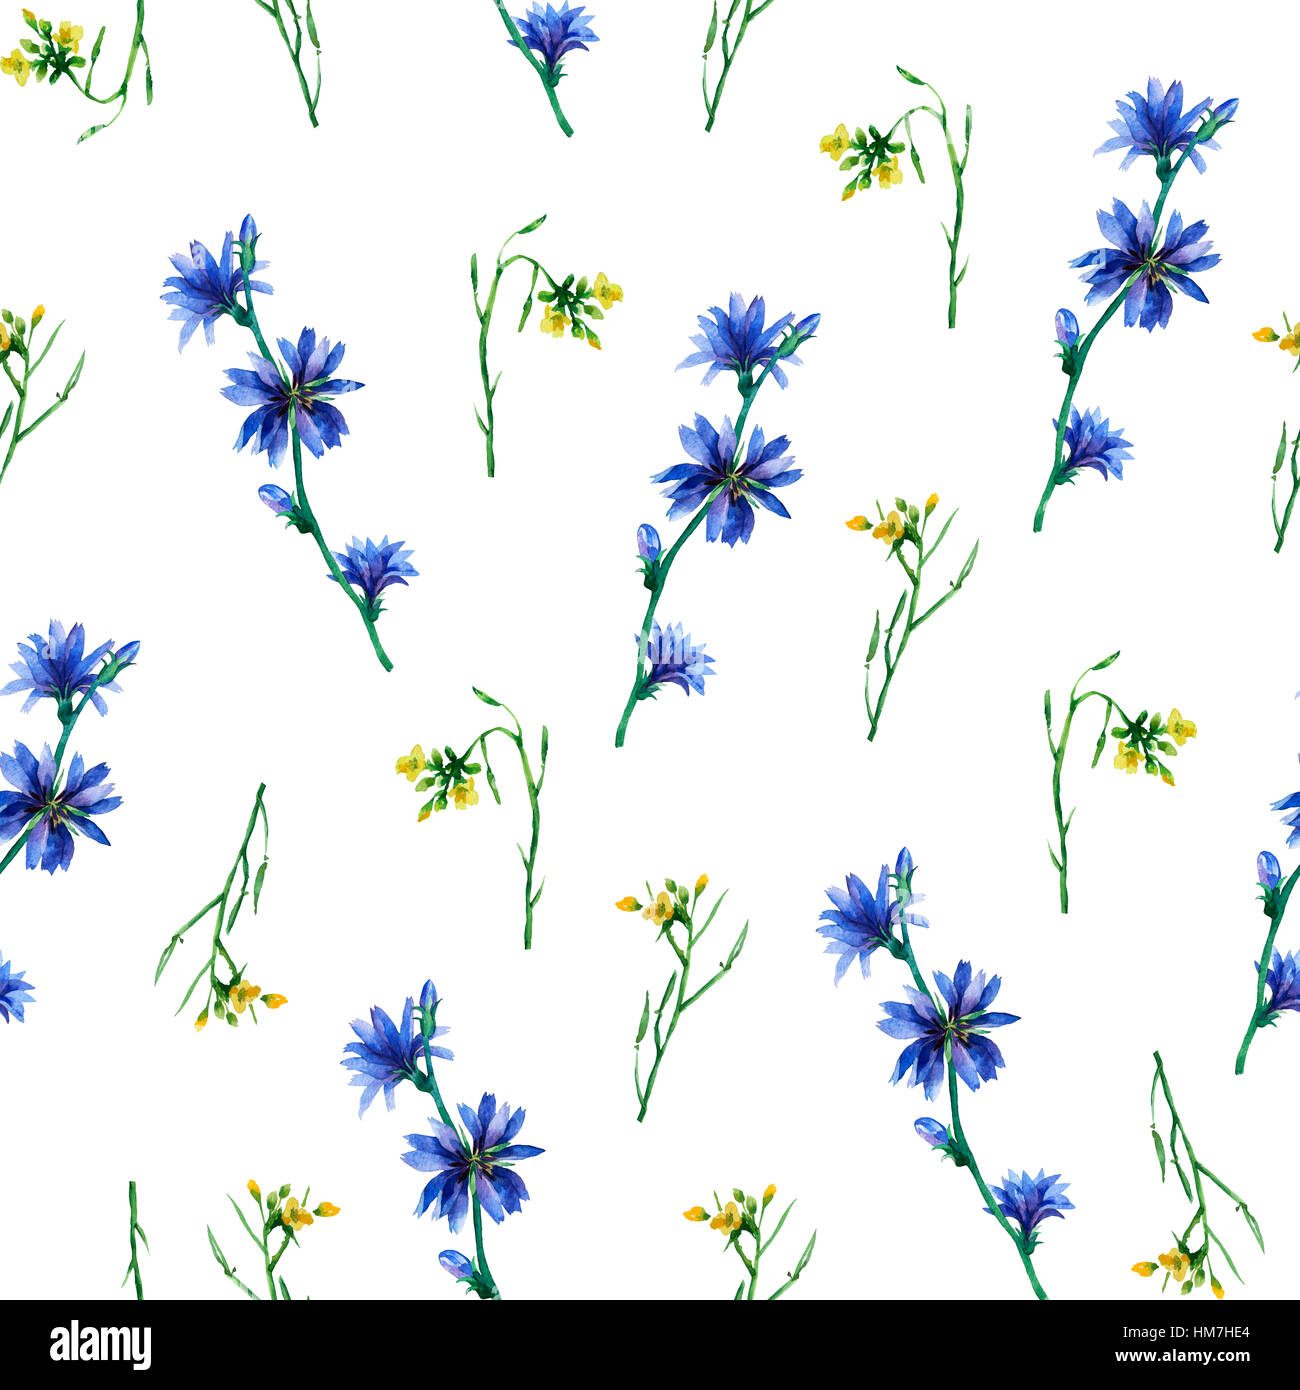 Seamless pattern with yellow rocket and blue chicory flowers. Hand drawn watercolor painting on white background. Stock Photo